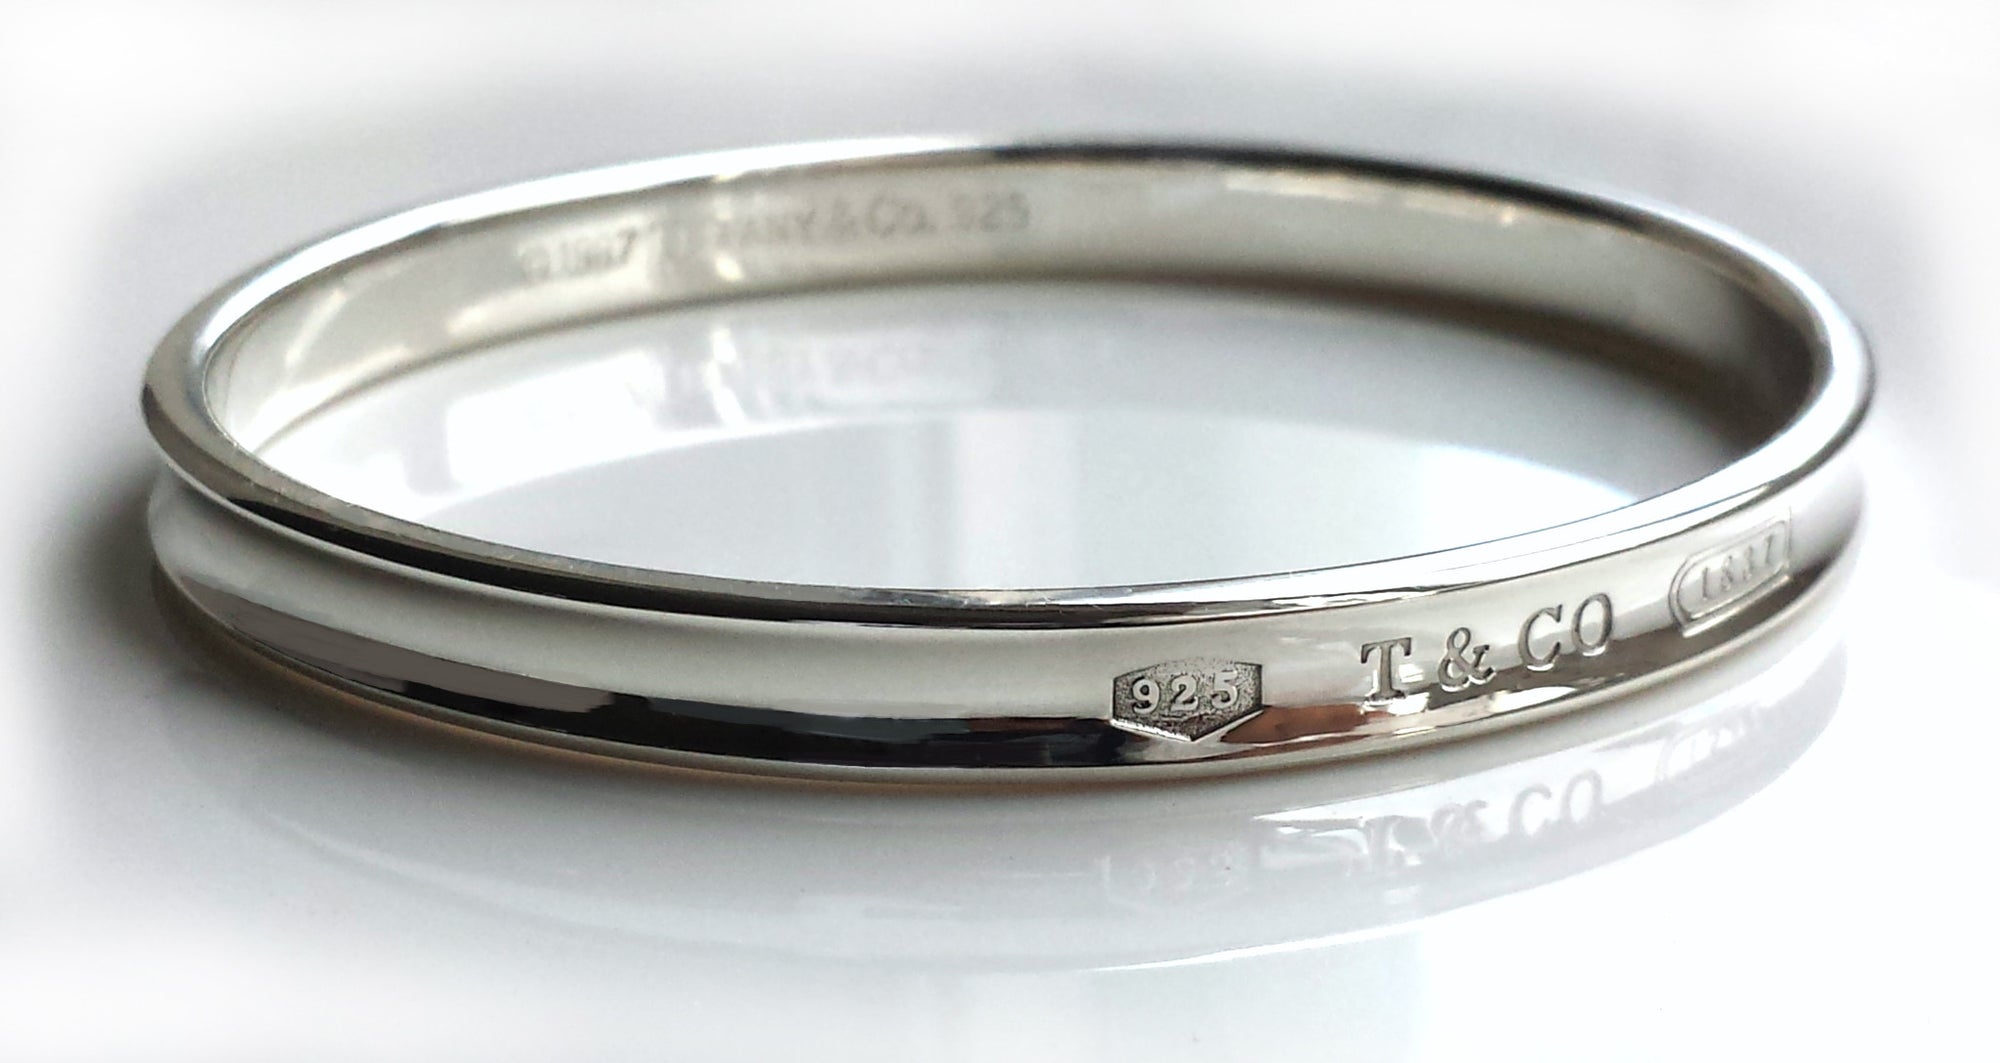 Tiffany & Co 1837 Sterling Silver Oval Bangle 7mm re-polished 7.87" (20cm)